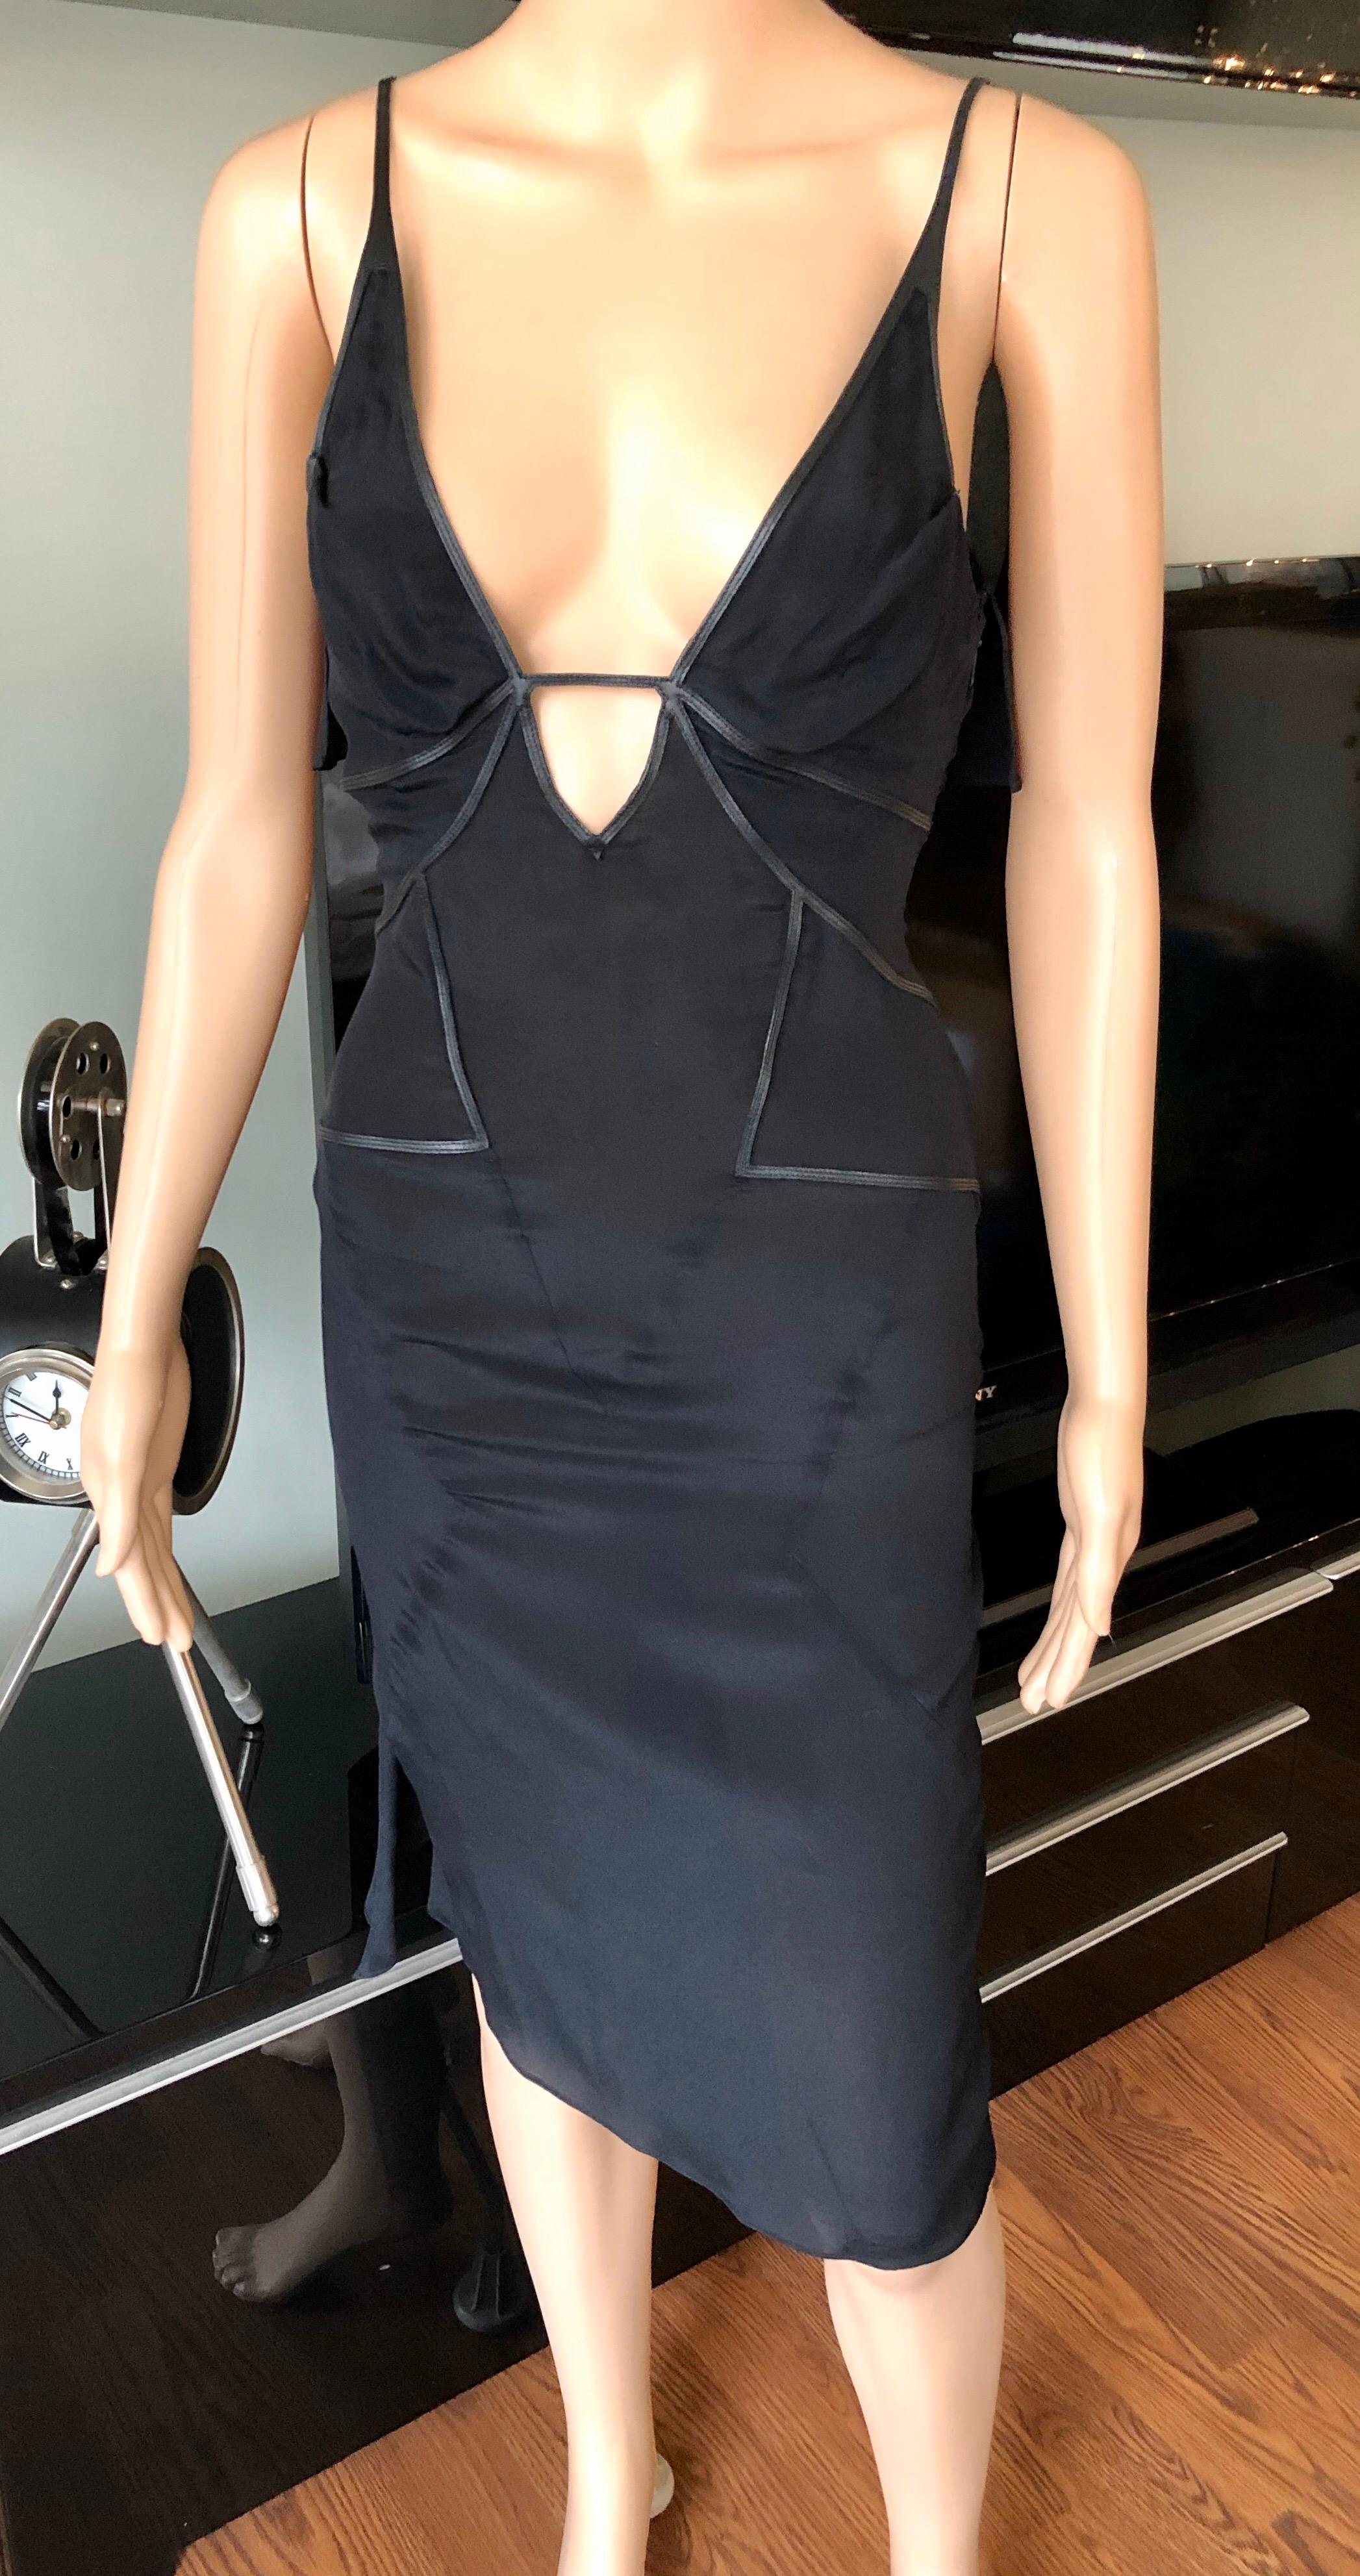 Gucci by Tom Ford S/S 2004 Cutout Plunged Neckline Black Dress In Good Condition For Sale In Naples, FL